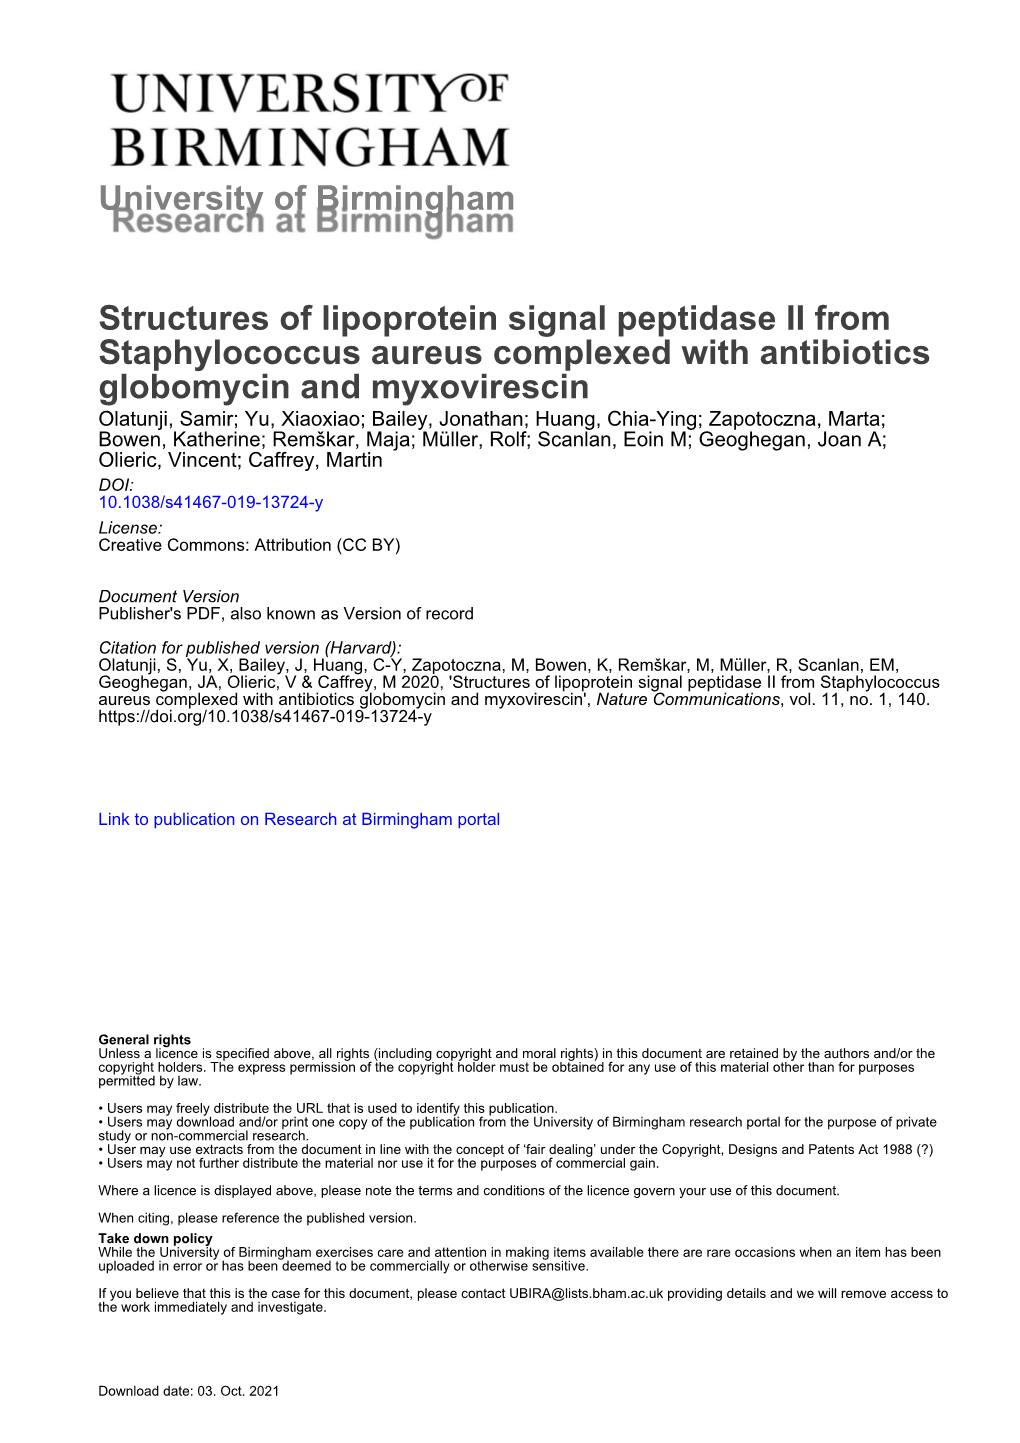 Structures of Lipoprotein Signal Peptidase II From